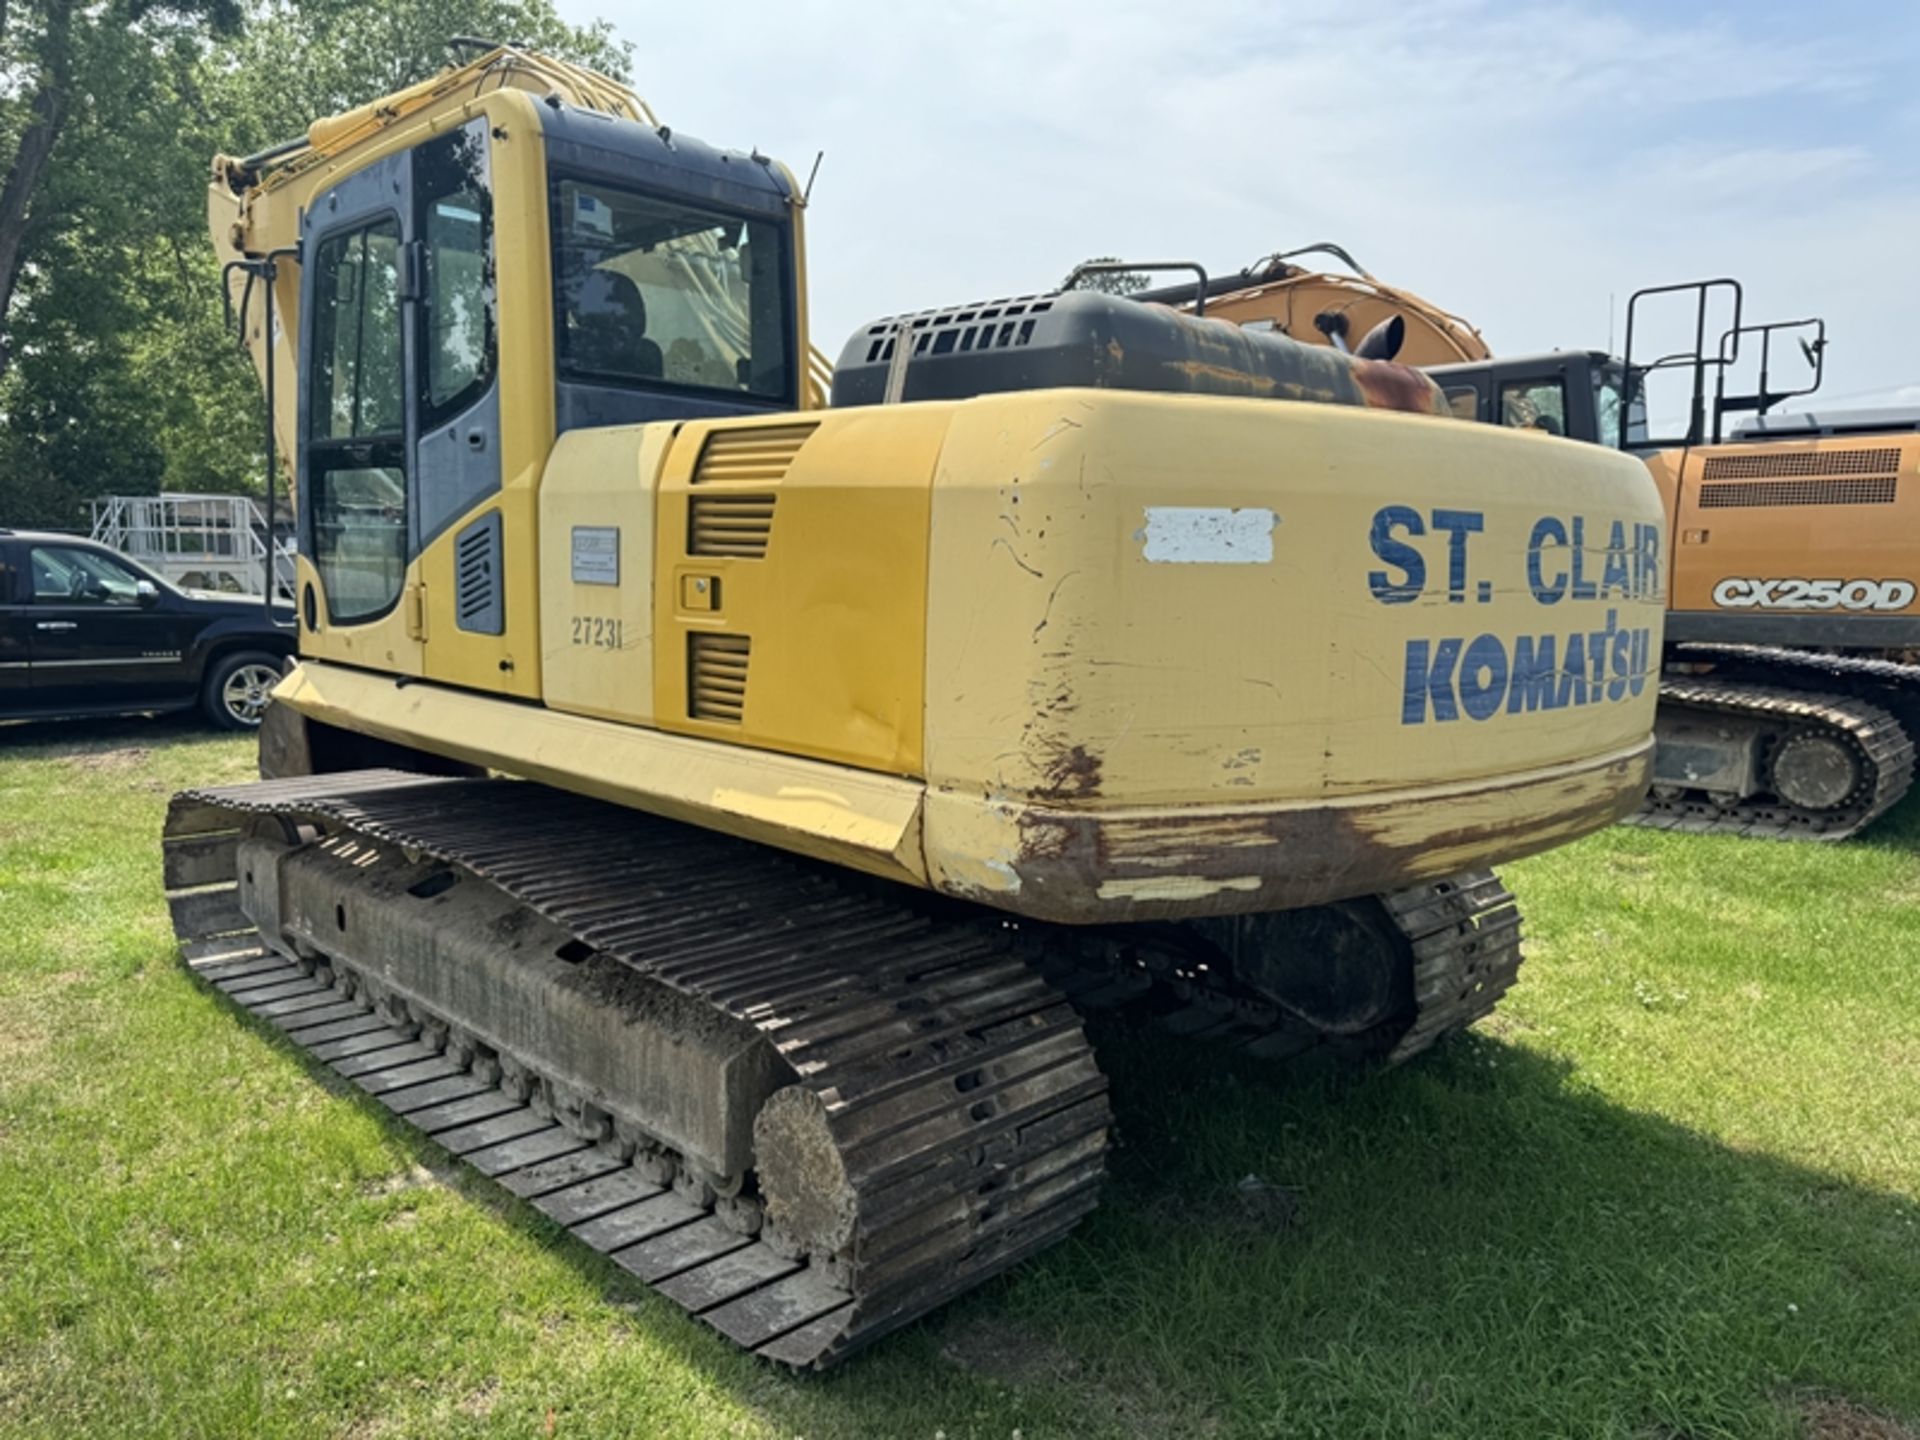 KOMATSU excavator - Model PC200LC-8 with manual thumb - 7046 hours showing- S/N: A88491 - PIN: - Image 6 of 11